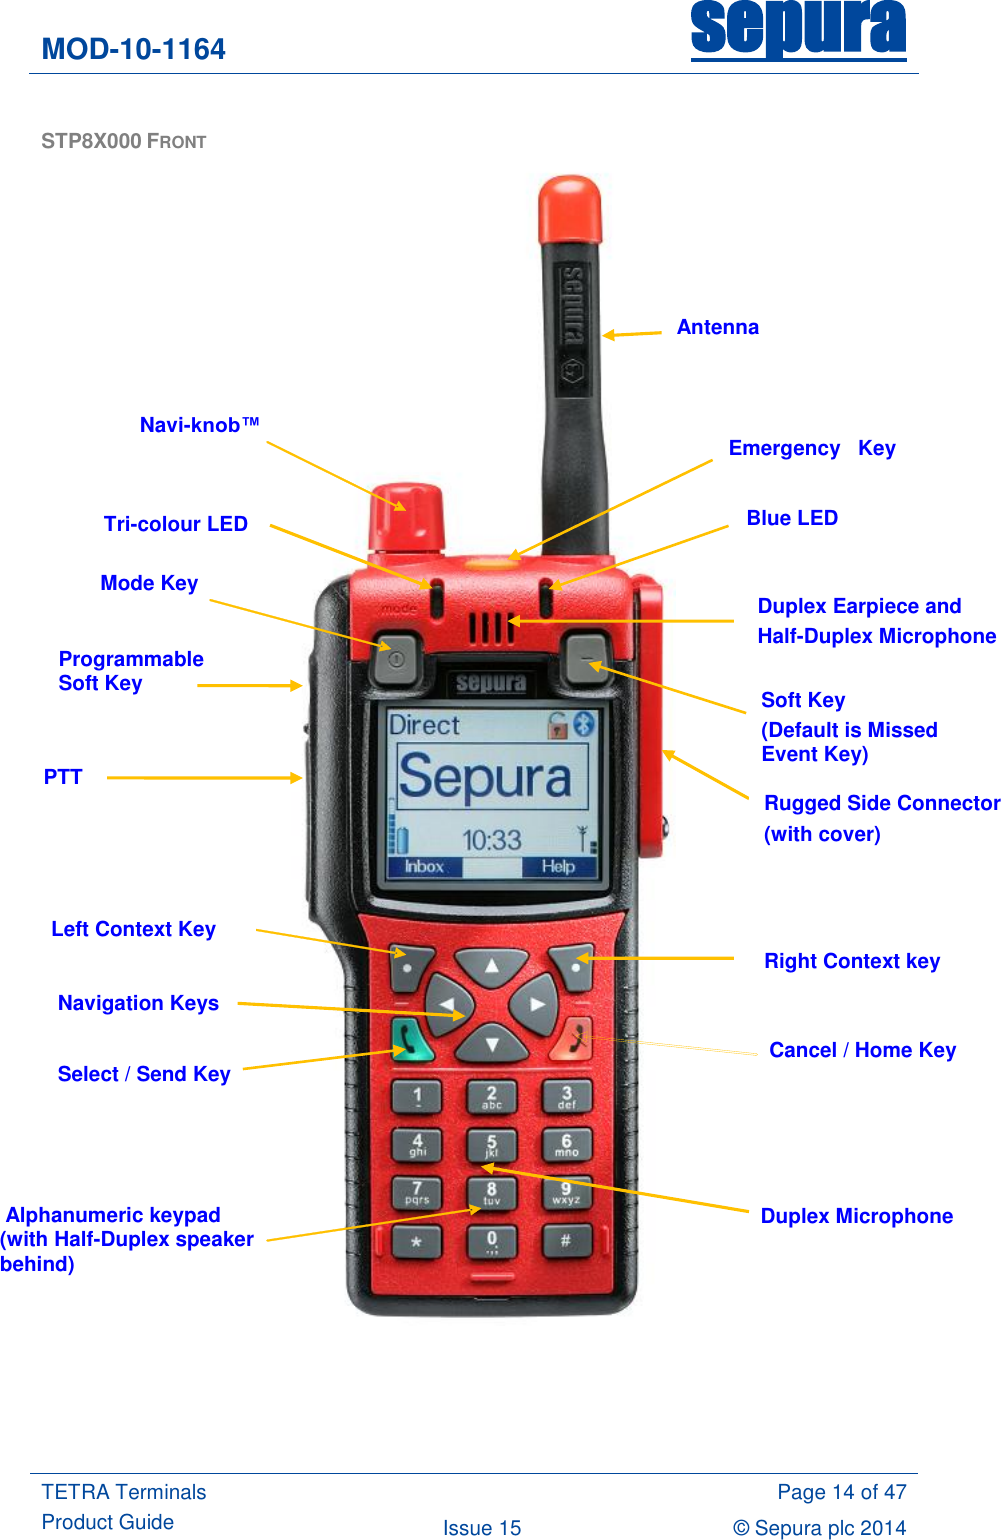 MOD-10-1164 sepura  TETRA Terminals Product Guide  Page 14 of 47 Issue 15 © Sepura plc 2014   STP8X000 FRONT  Emergency   Key  Navi-knob™  Mode Key PTT  Navigation Keys Select / Send Key Duplex Earpiece and  Half-Duplex Microphone    -  Cancel / Home Key  Alphanumeric keypad (with Half-Duplex speaker behind) Duplex Microphone Blue LED Antenna Left Context Key Right Context key Programmable Soft Key  Tri-colour LED Soft Key (Default is Missed Event Key) Rugged Side Connector (with cover) 